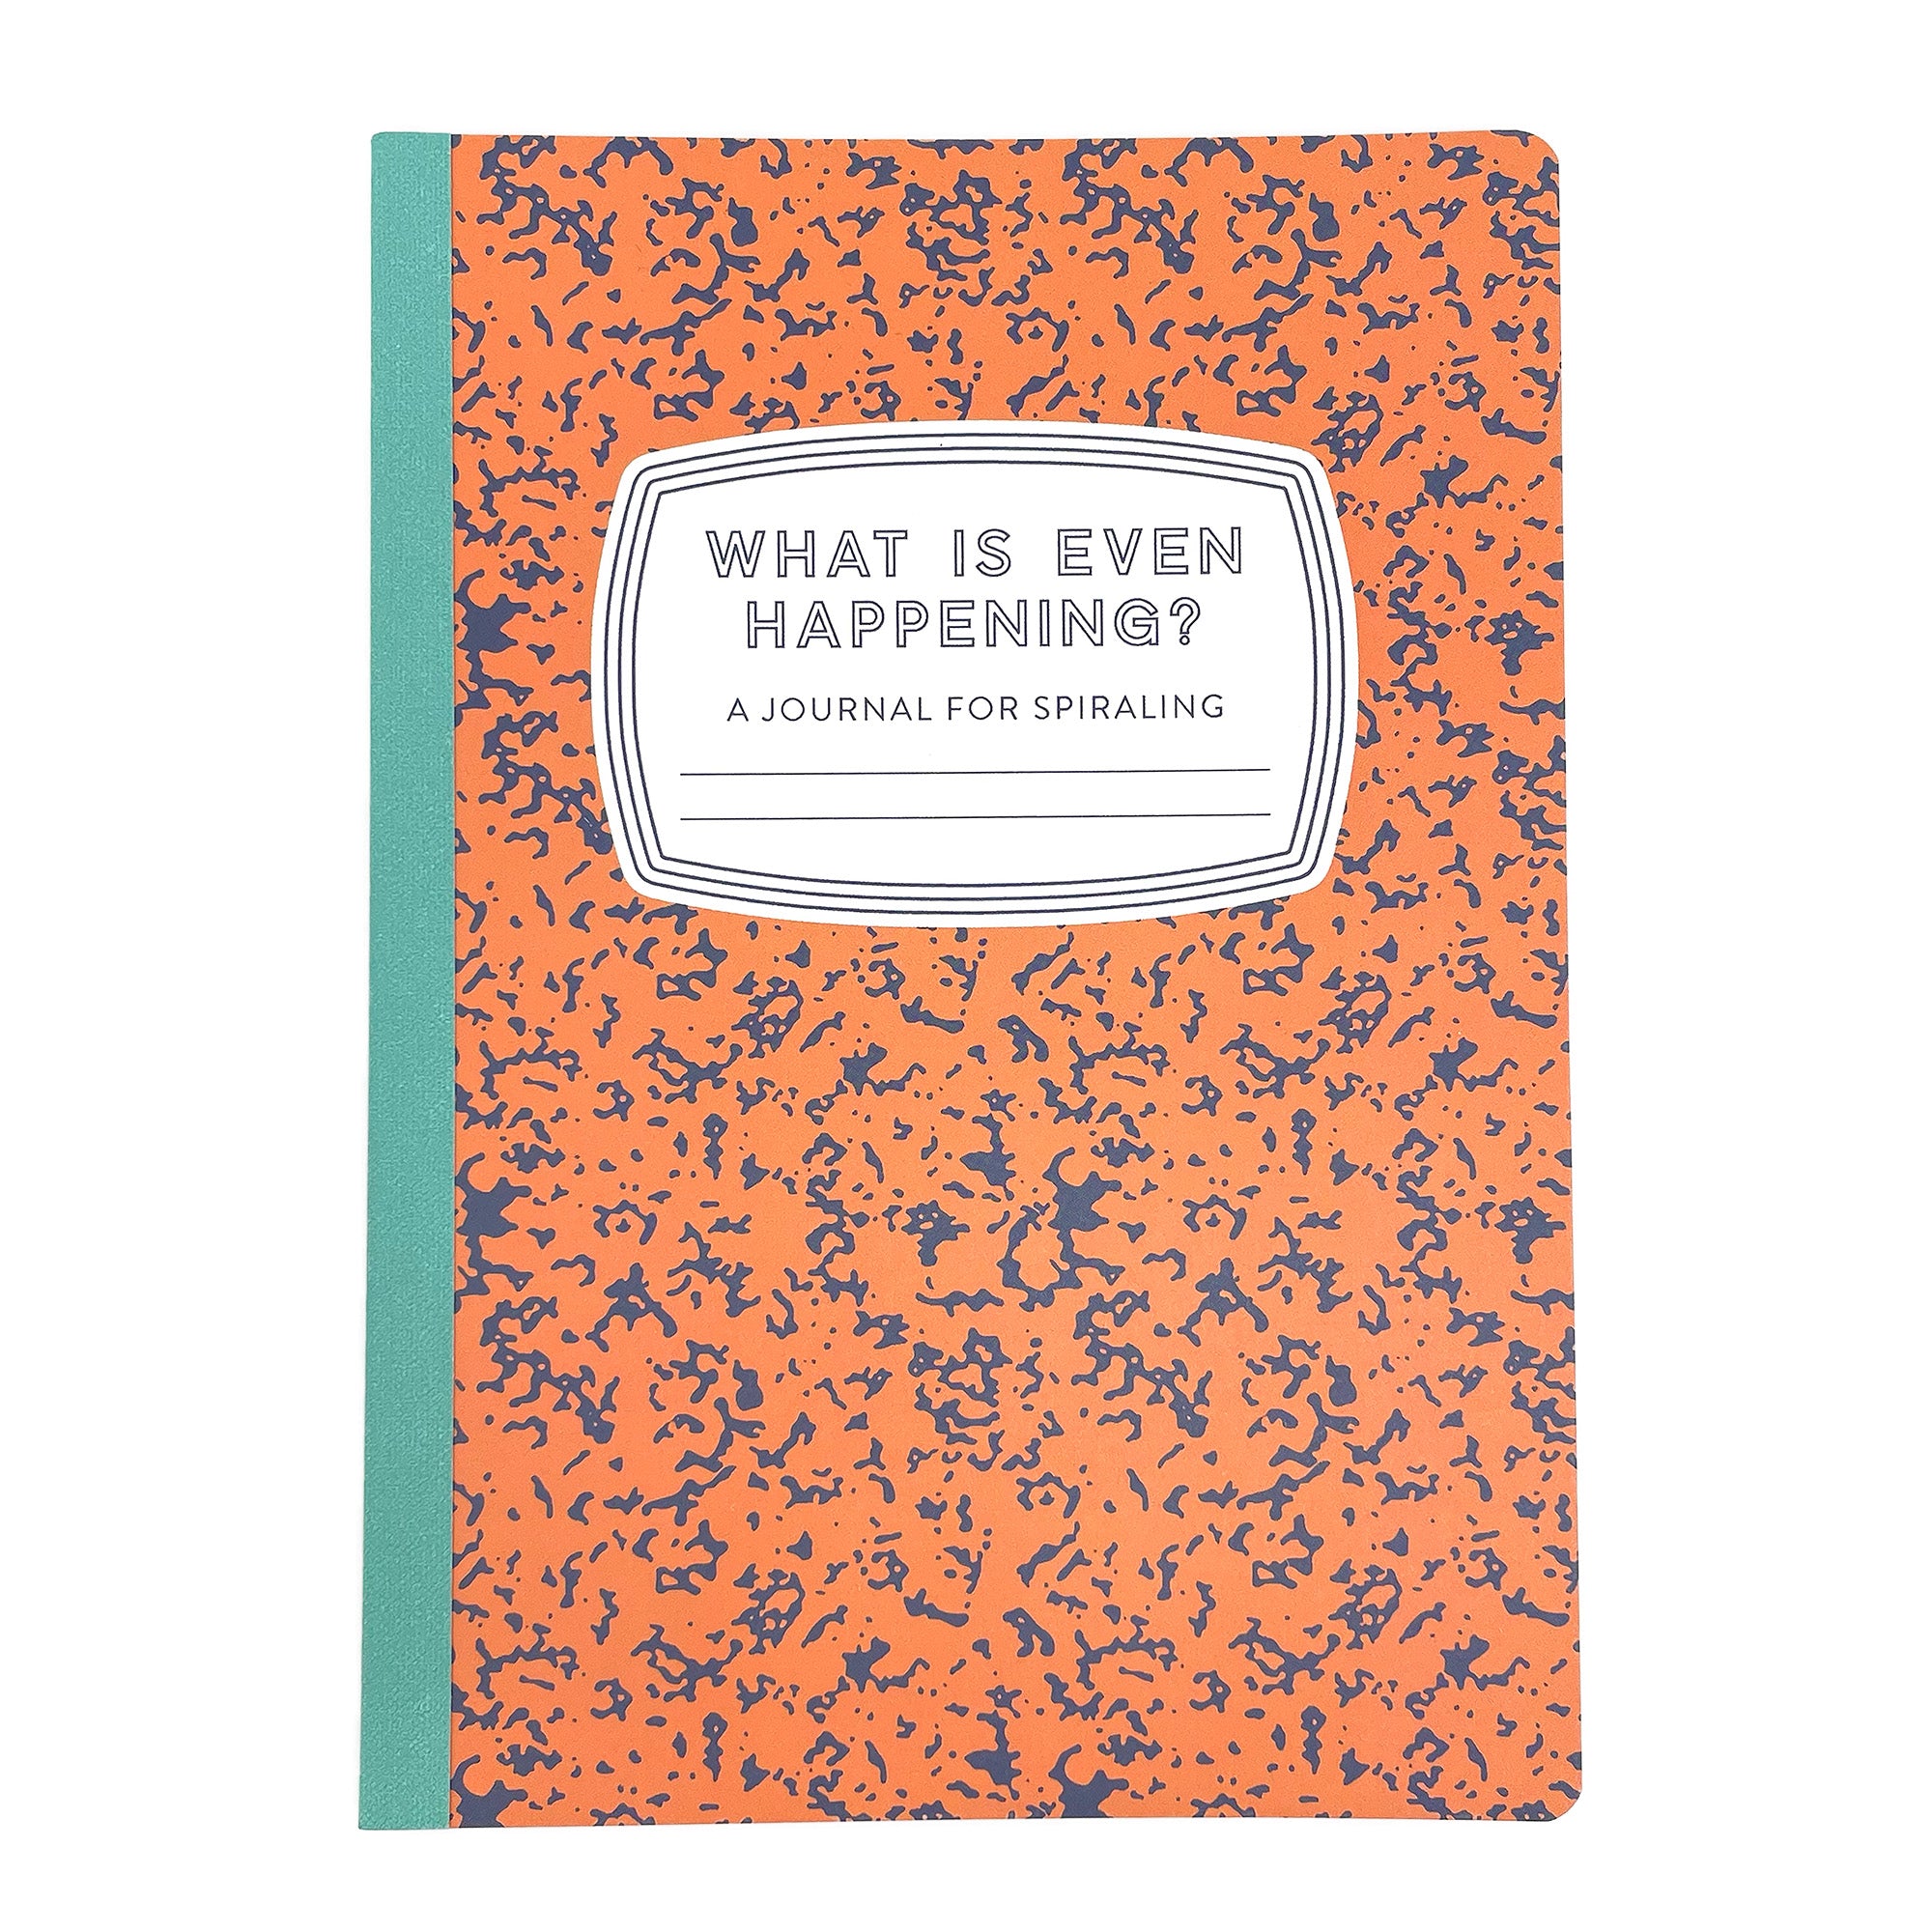 What Is Even Happening?: A Journal for Spiraling